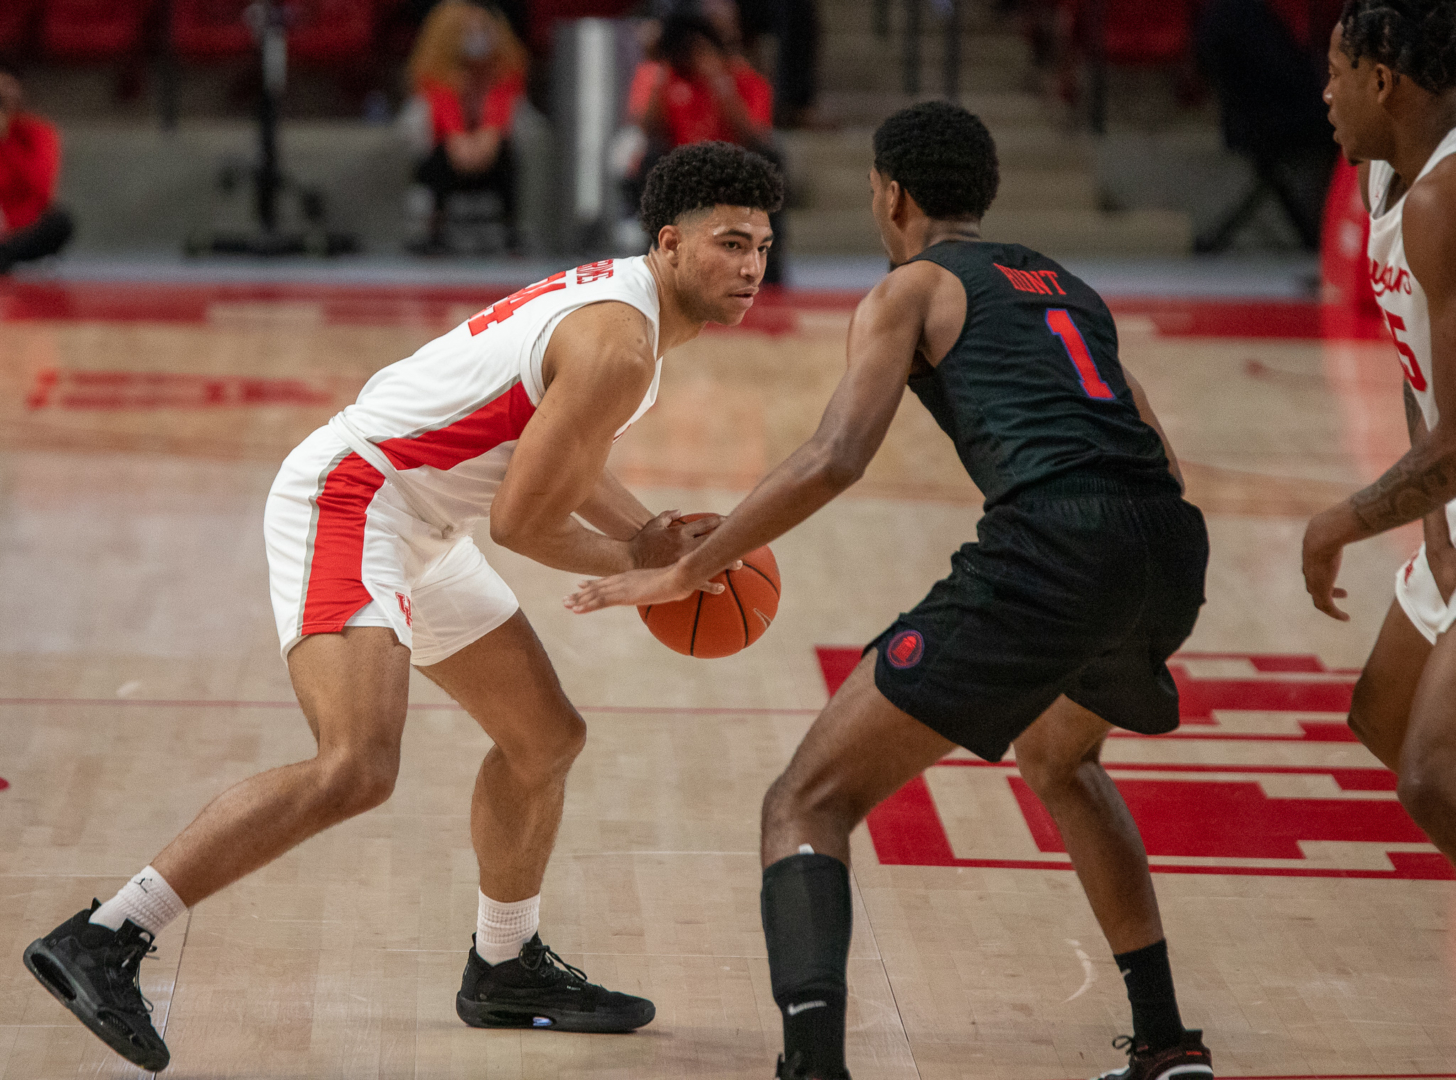 UH guard Quentin Grimes holds the ball with an SMU defender in front of him during a game in the 2020-21 season at Fertitta Center. The UH men's basketball team was announced as a two-seed in the NCAA's in-season bracket show on Saturday. | Andy Yanez/The Cougar